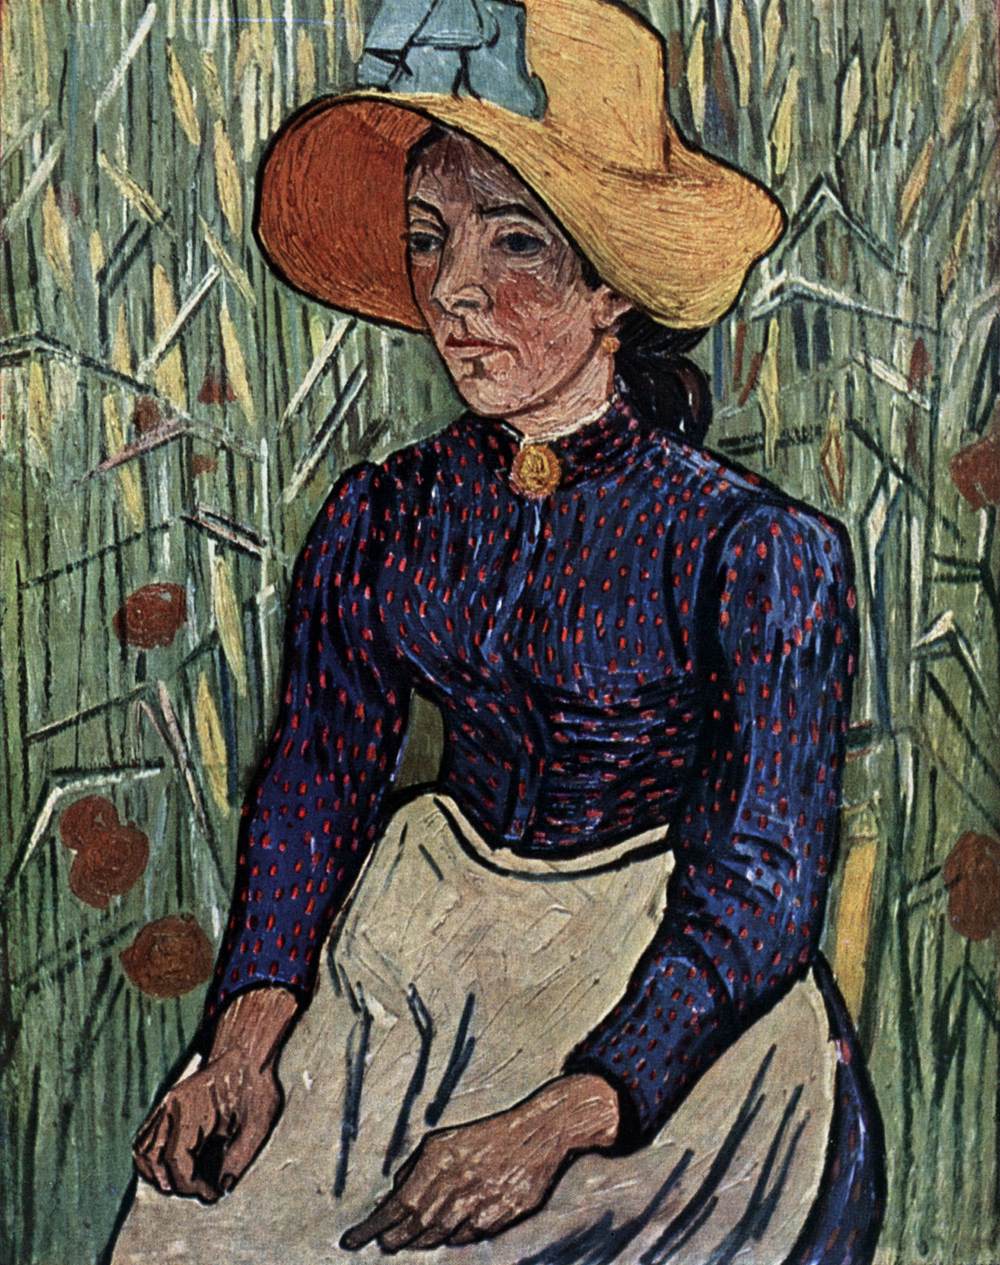 Young Peasant Woman with Straw Hat Sitting in Wheat